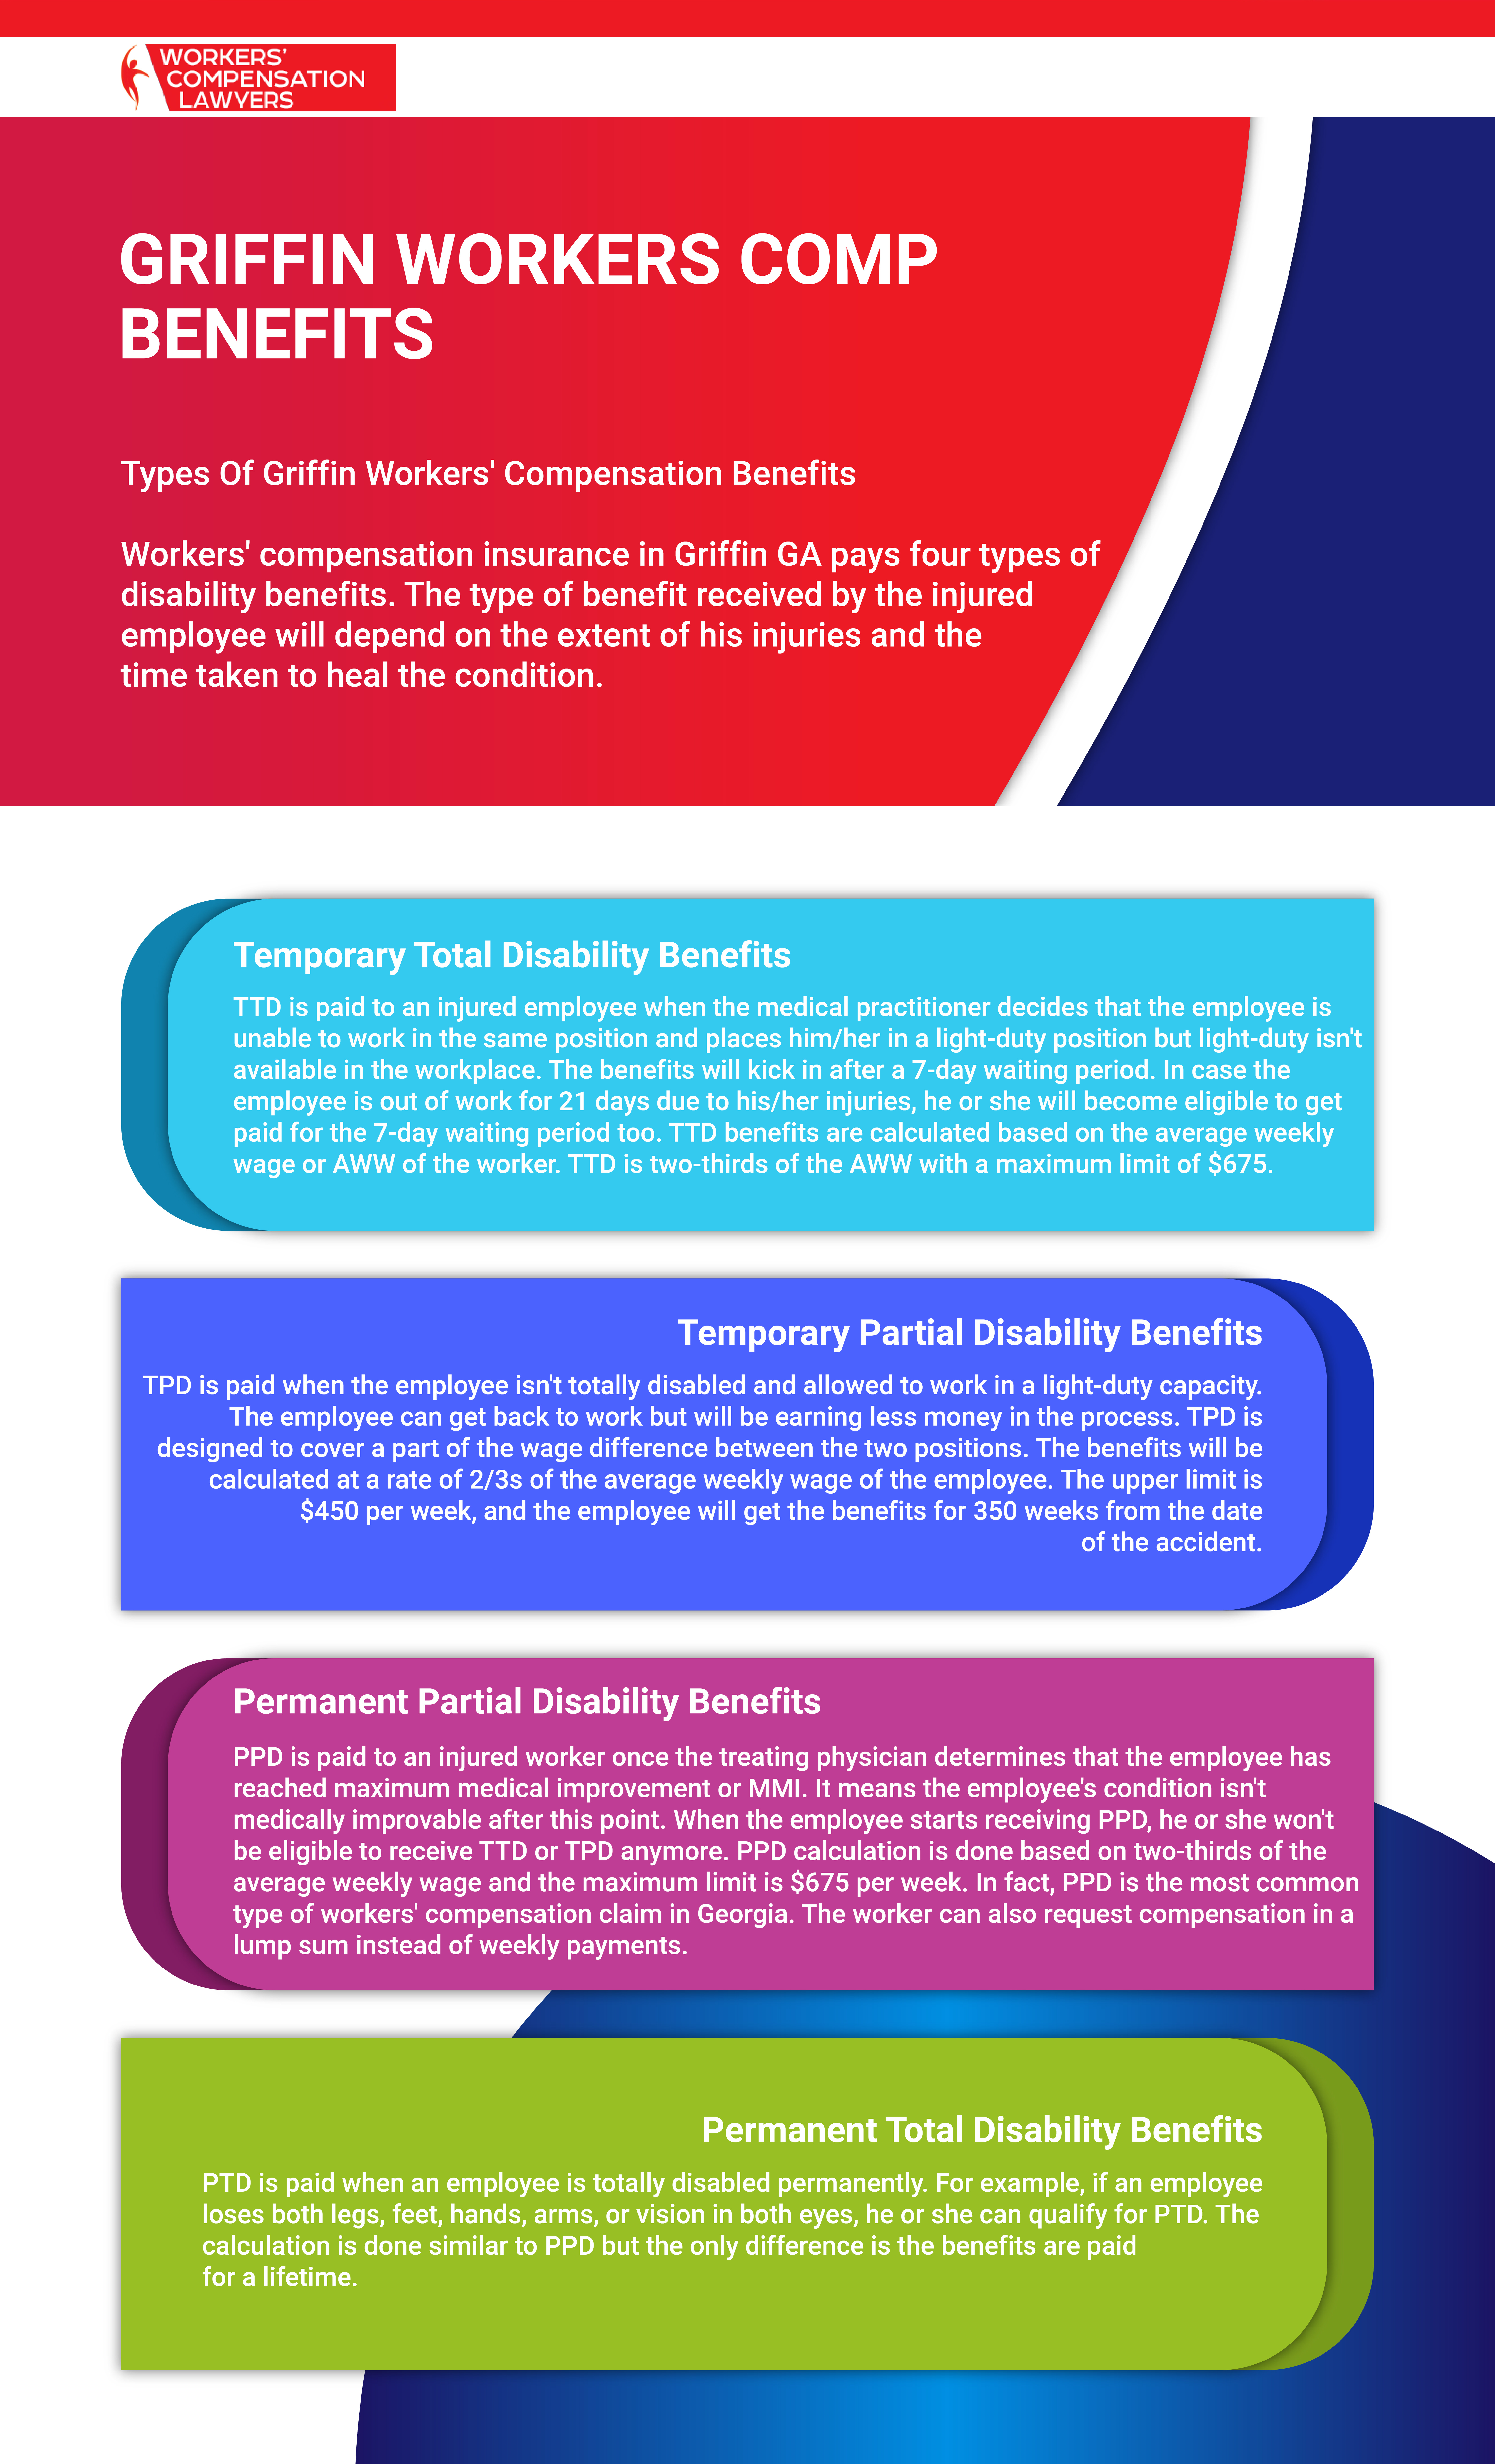 Griffin Workers Compensation Benefits Infographic